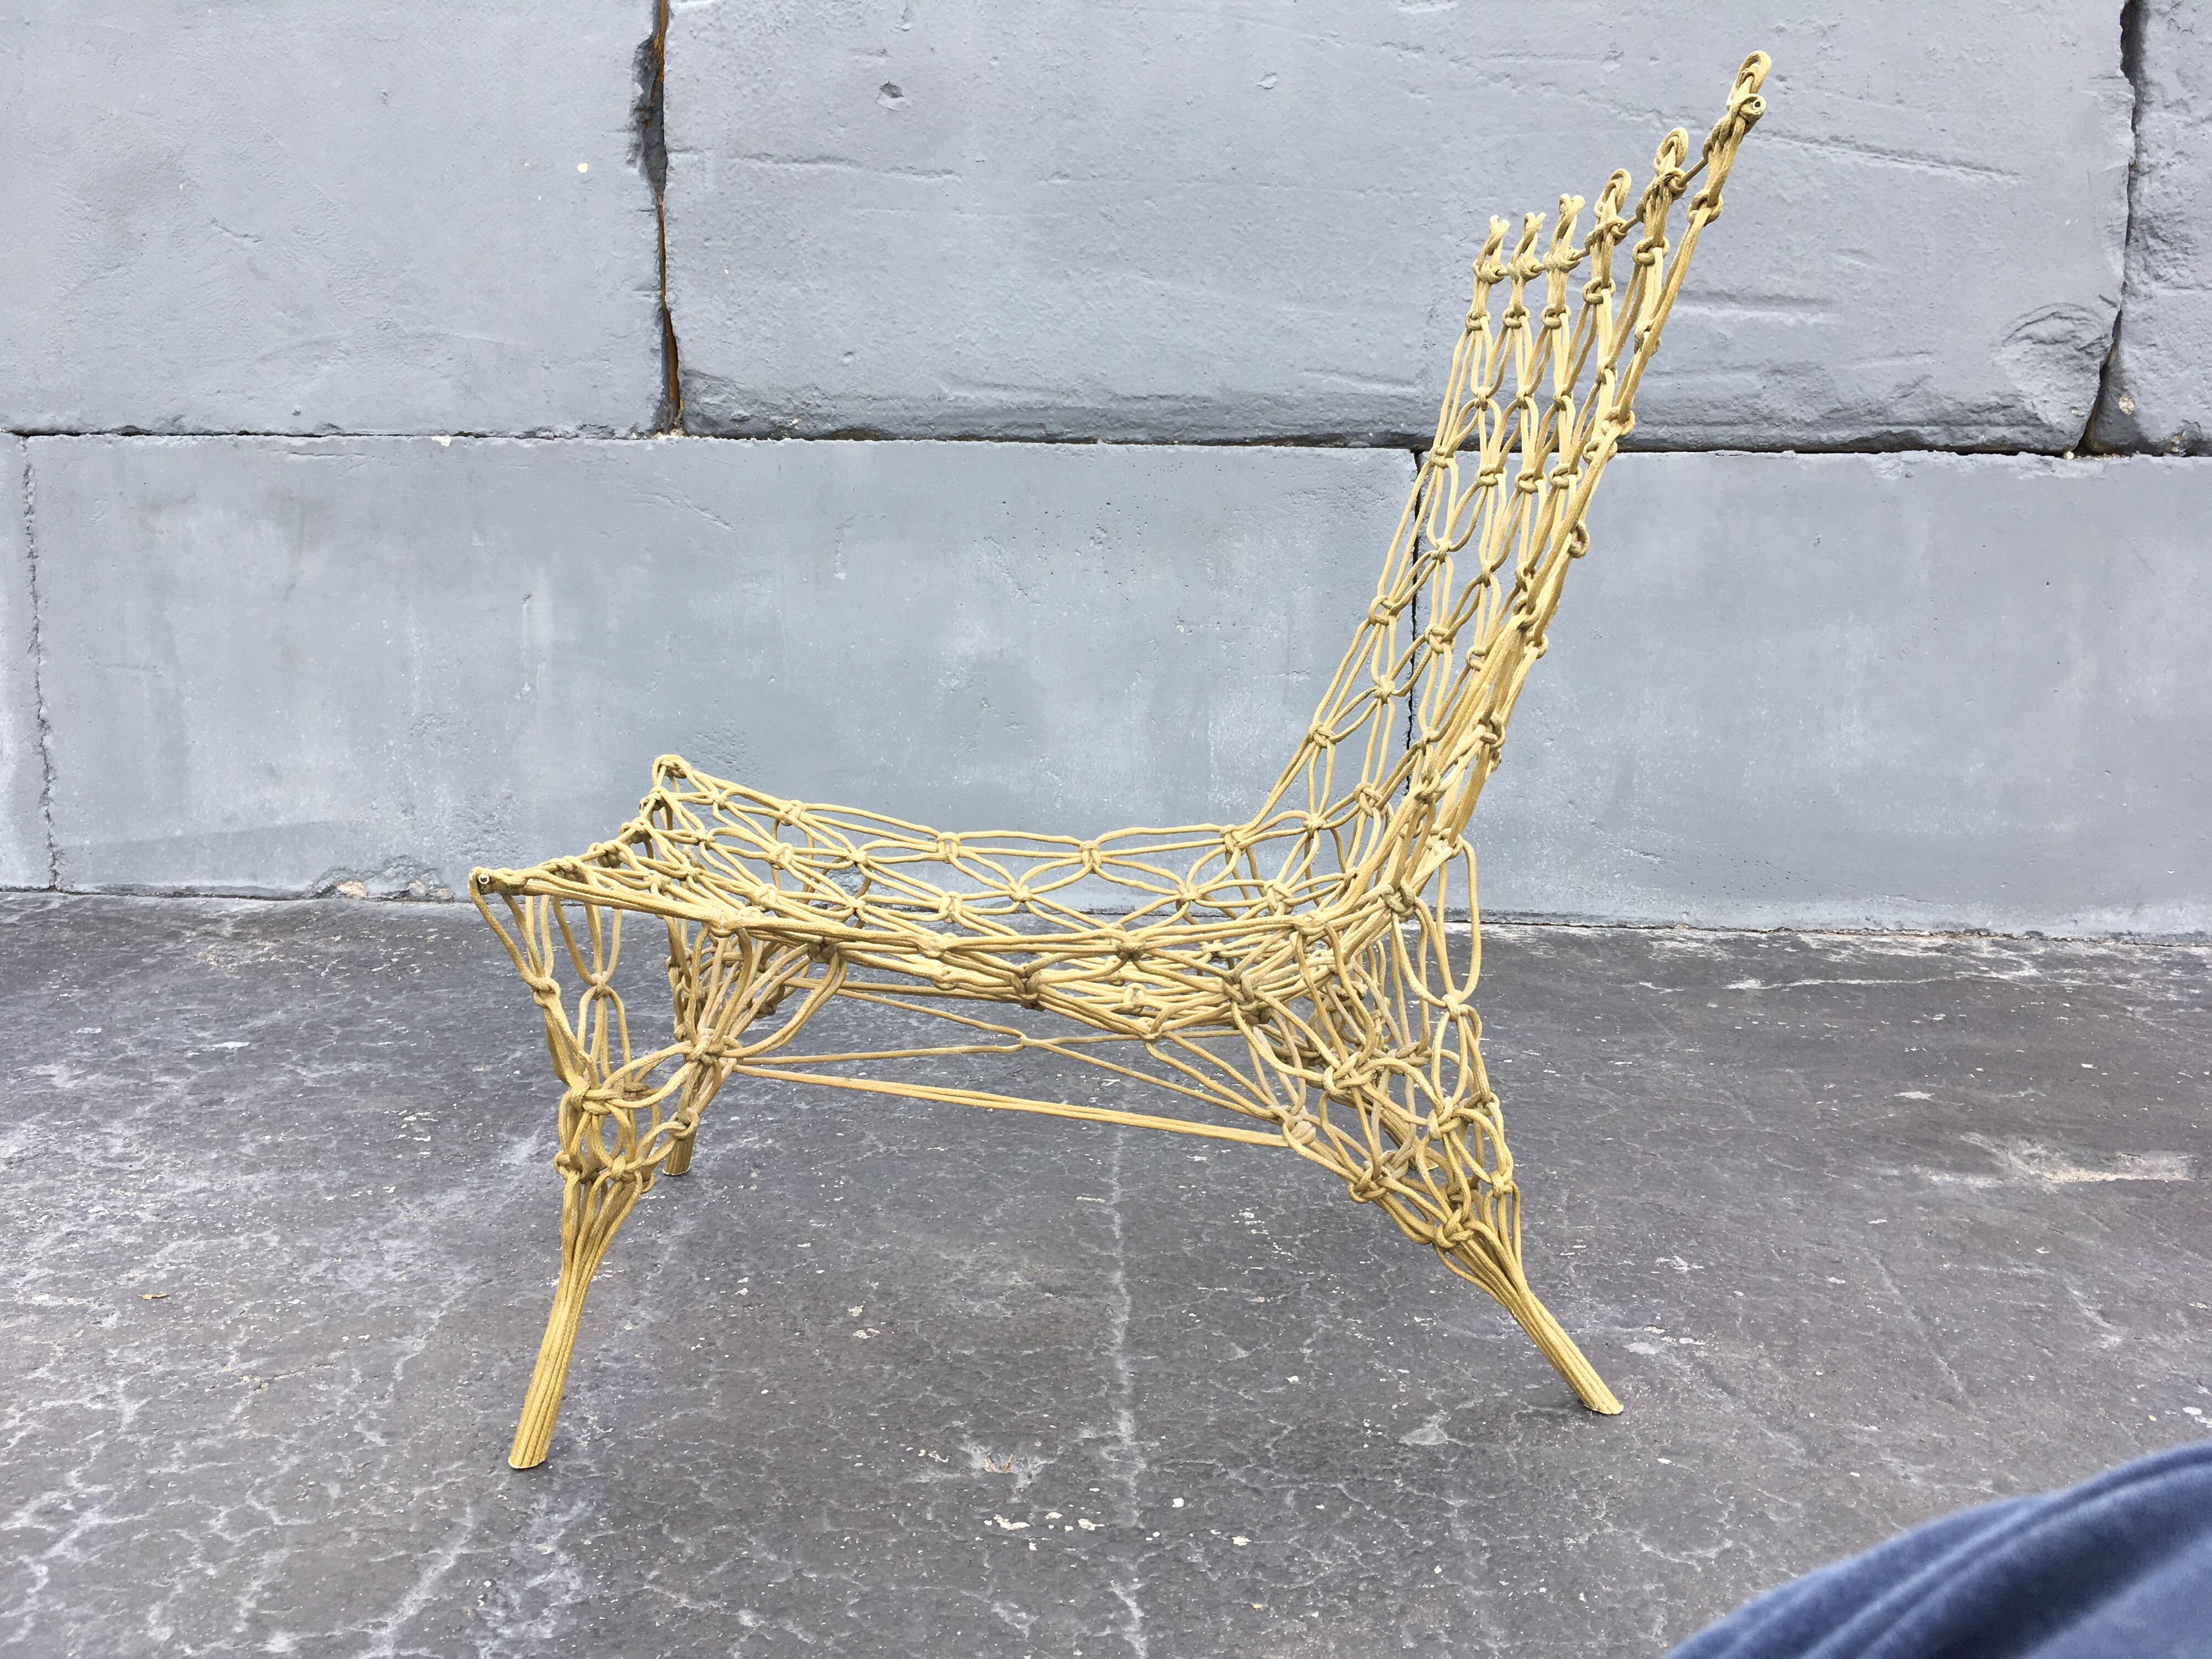 Contemporary Marcel Wanders “Knotted” Chair